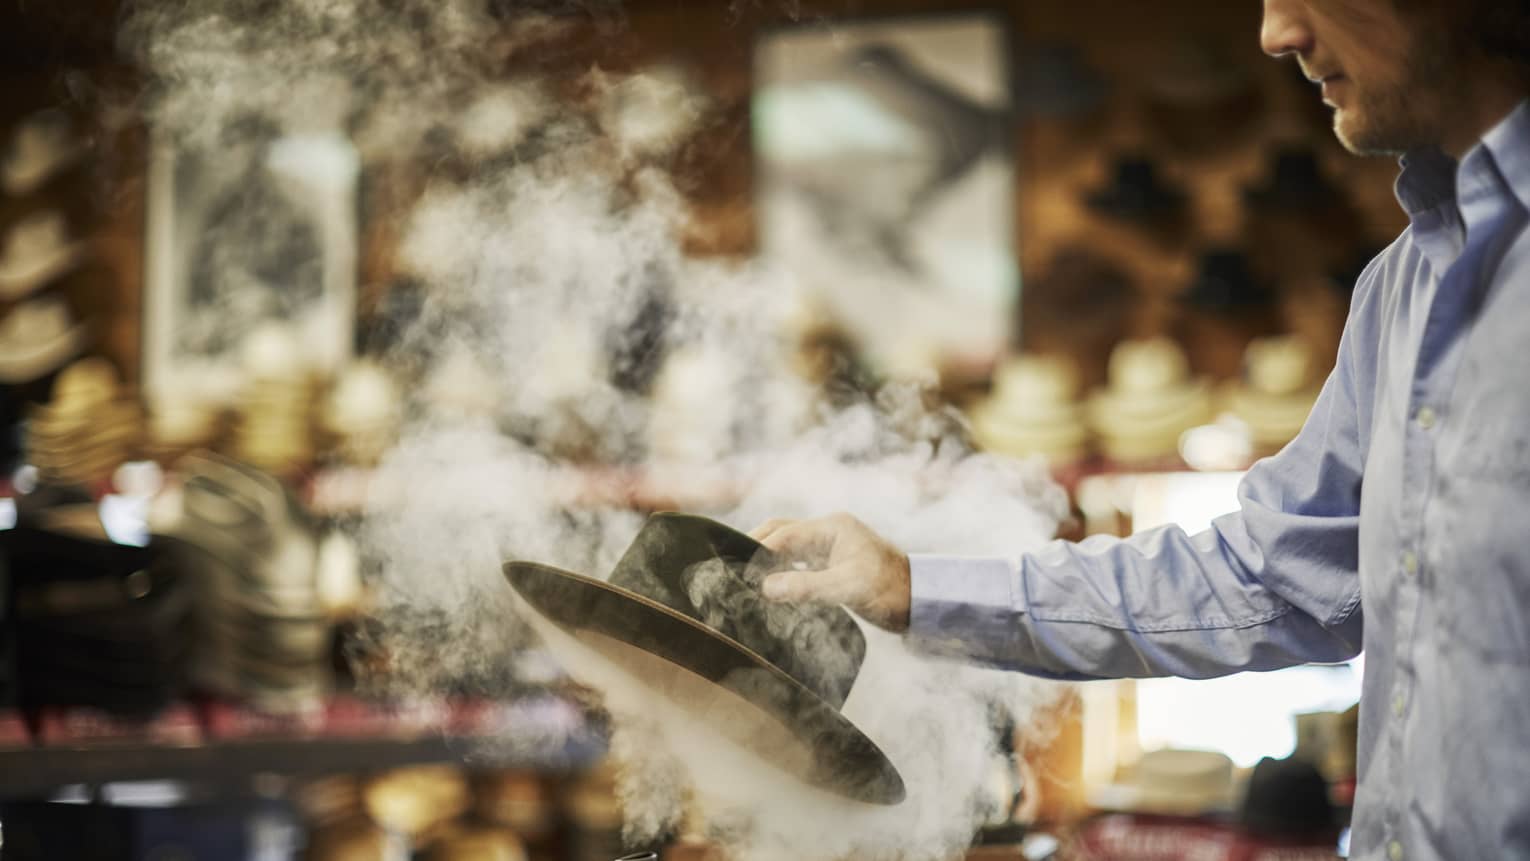 A man picking up a steaming hat.